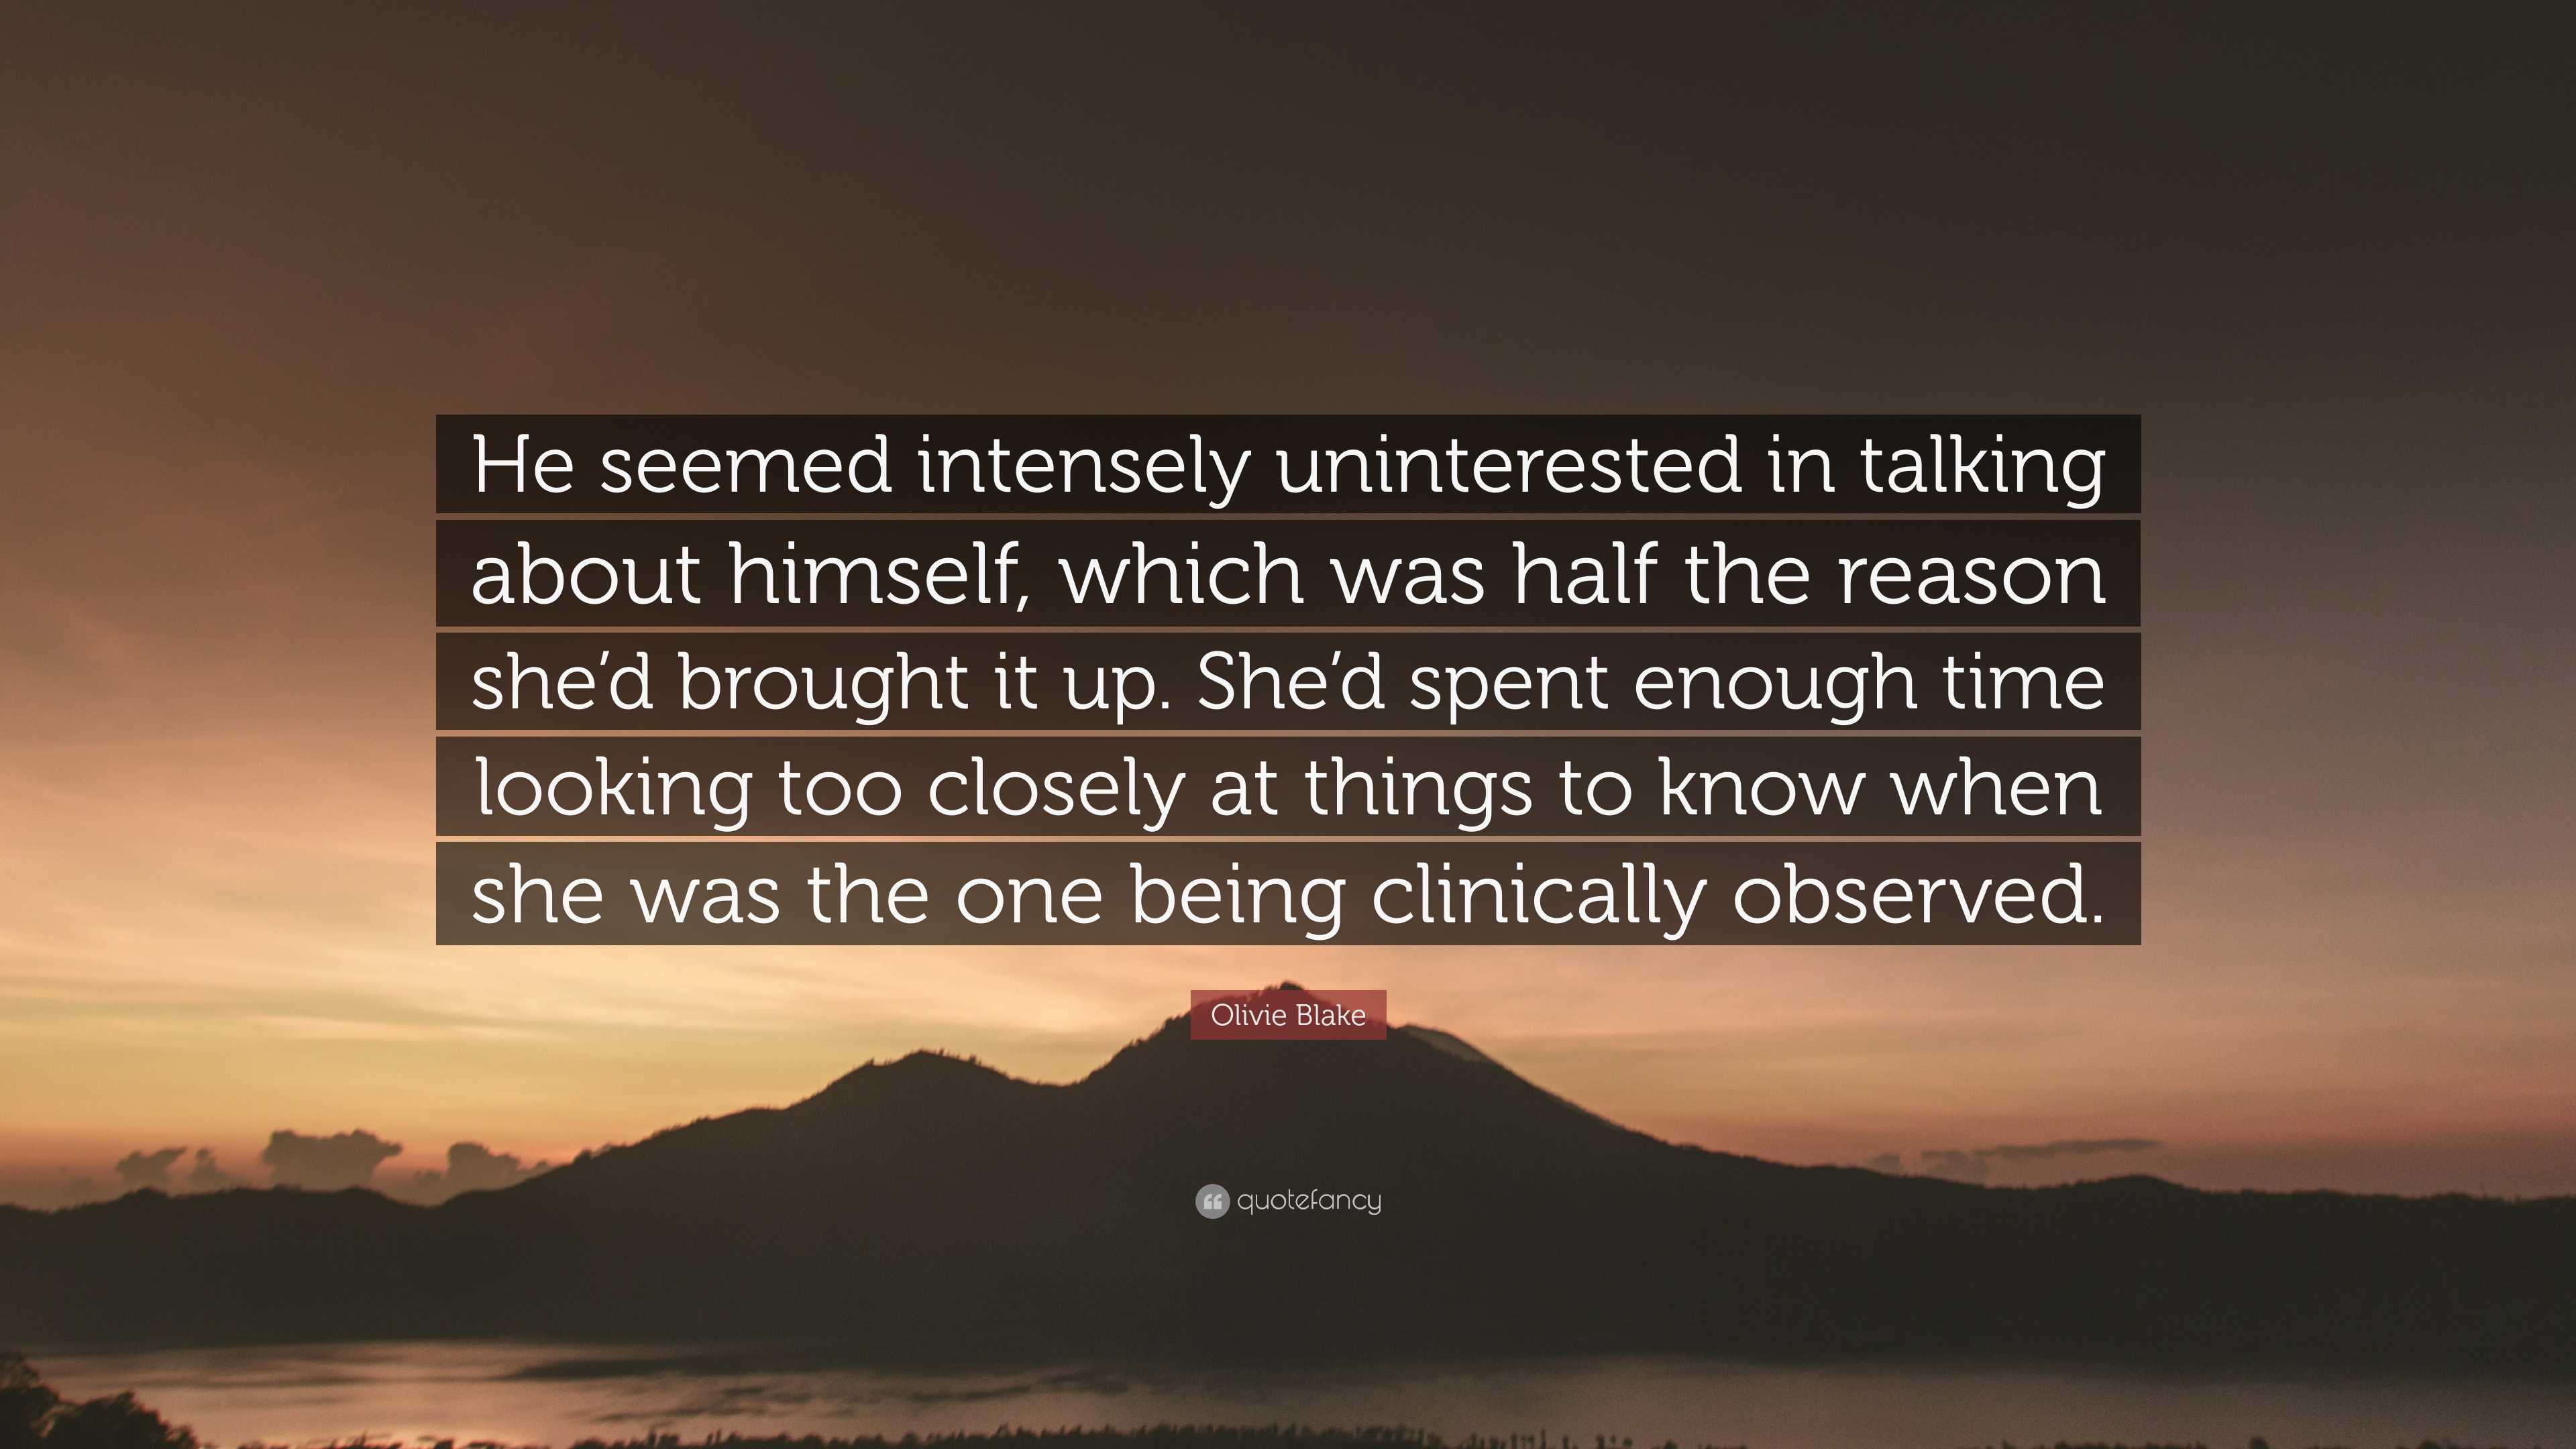 Olivie Blake Quote: “He seemed intensely uninterested in talking about ...